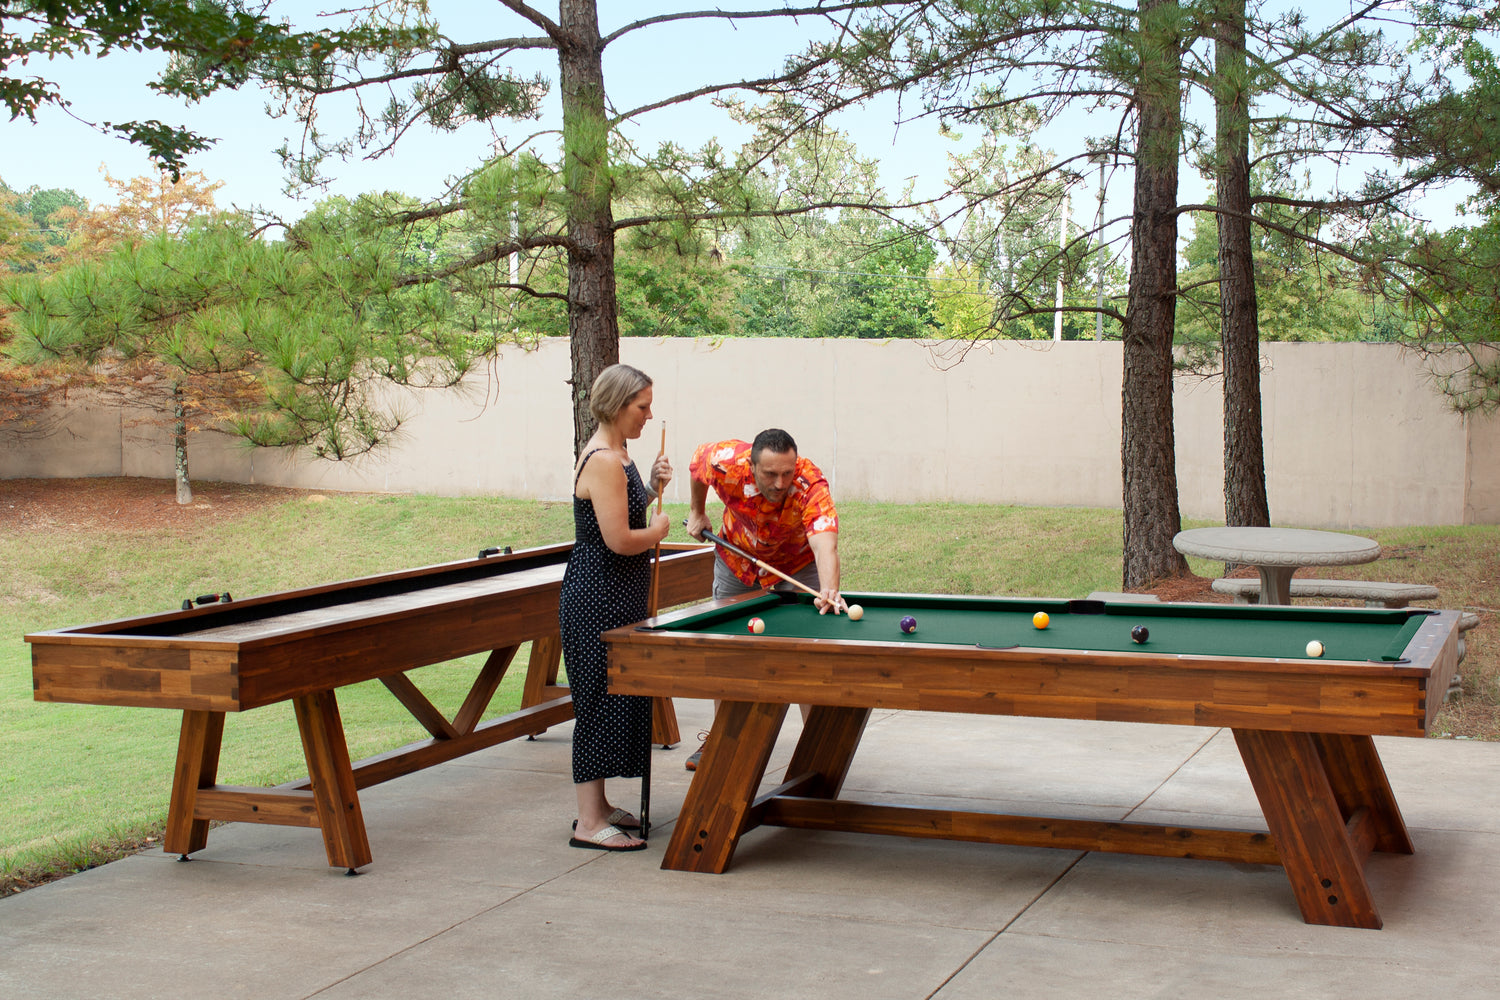 Legacy Billiards 8 Ft Barren Outdoor Pool Table in Natural Acacia Finish with People Playing Pool Outside and Emory Outdoor Shuffleboard